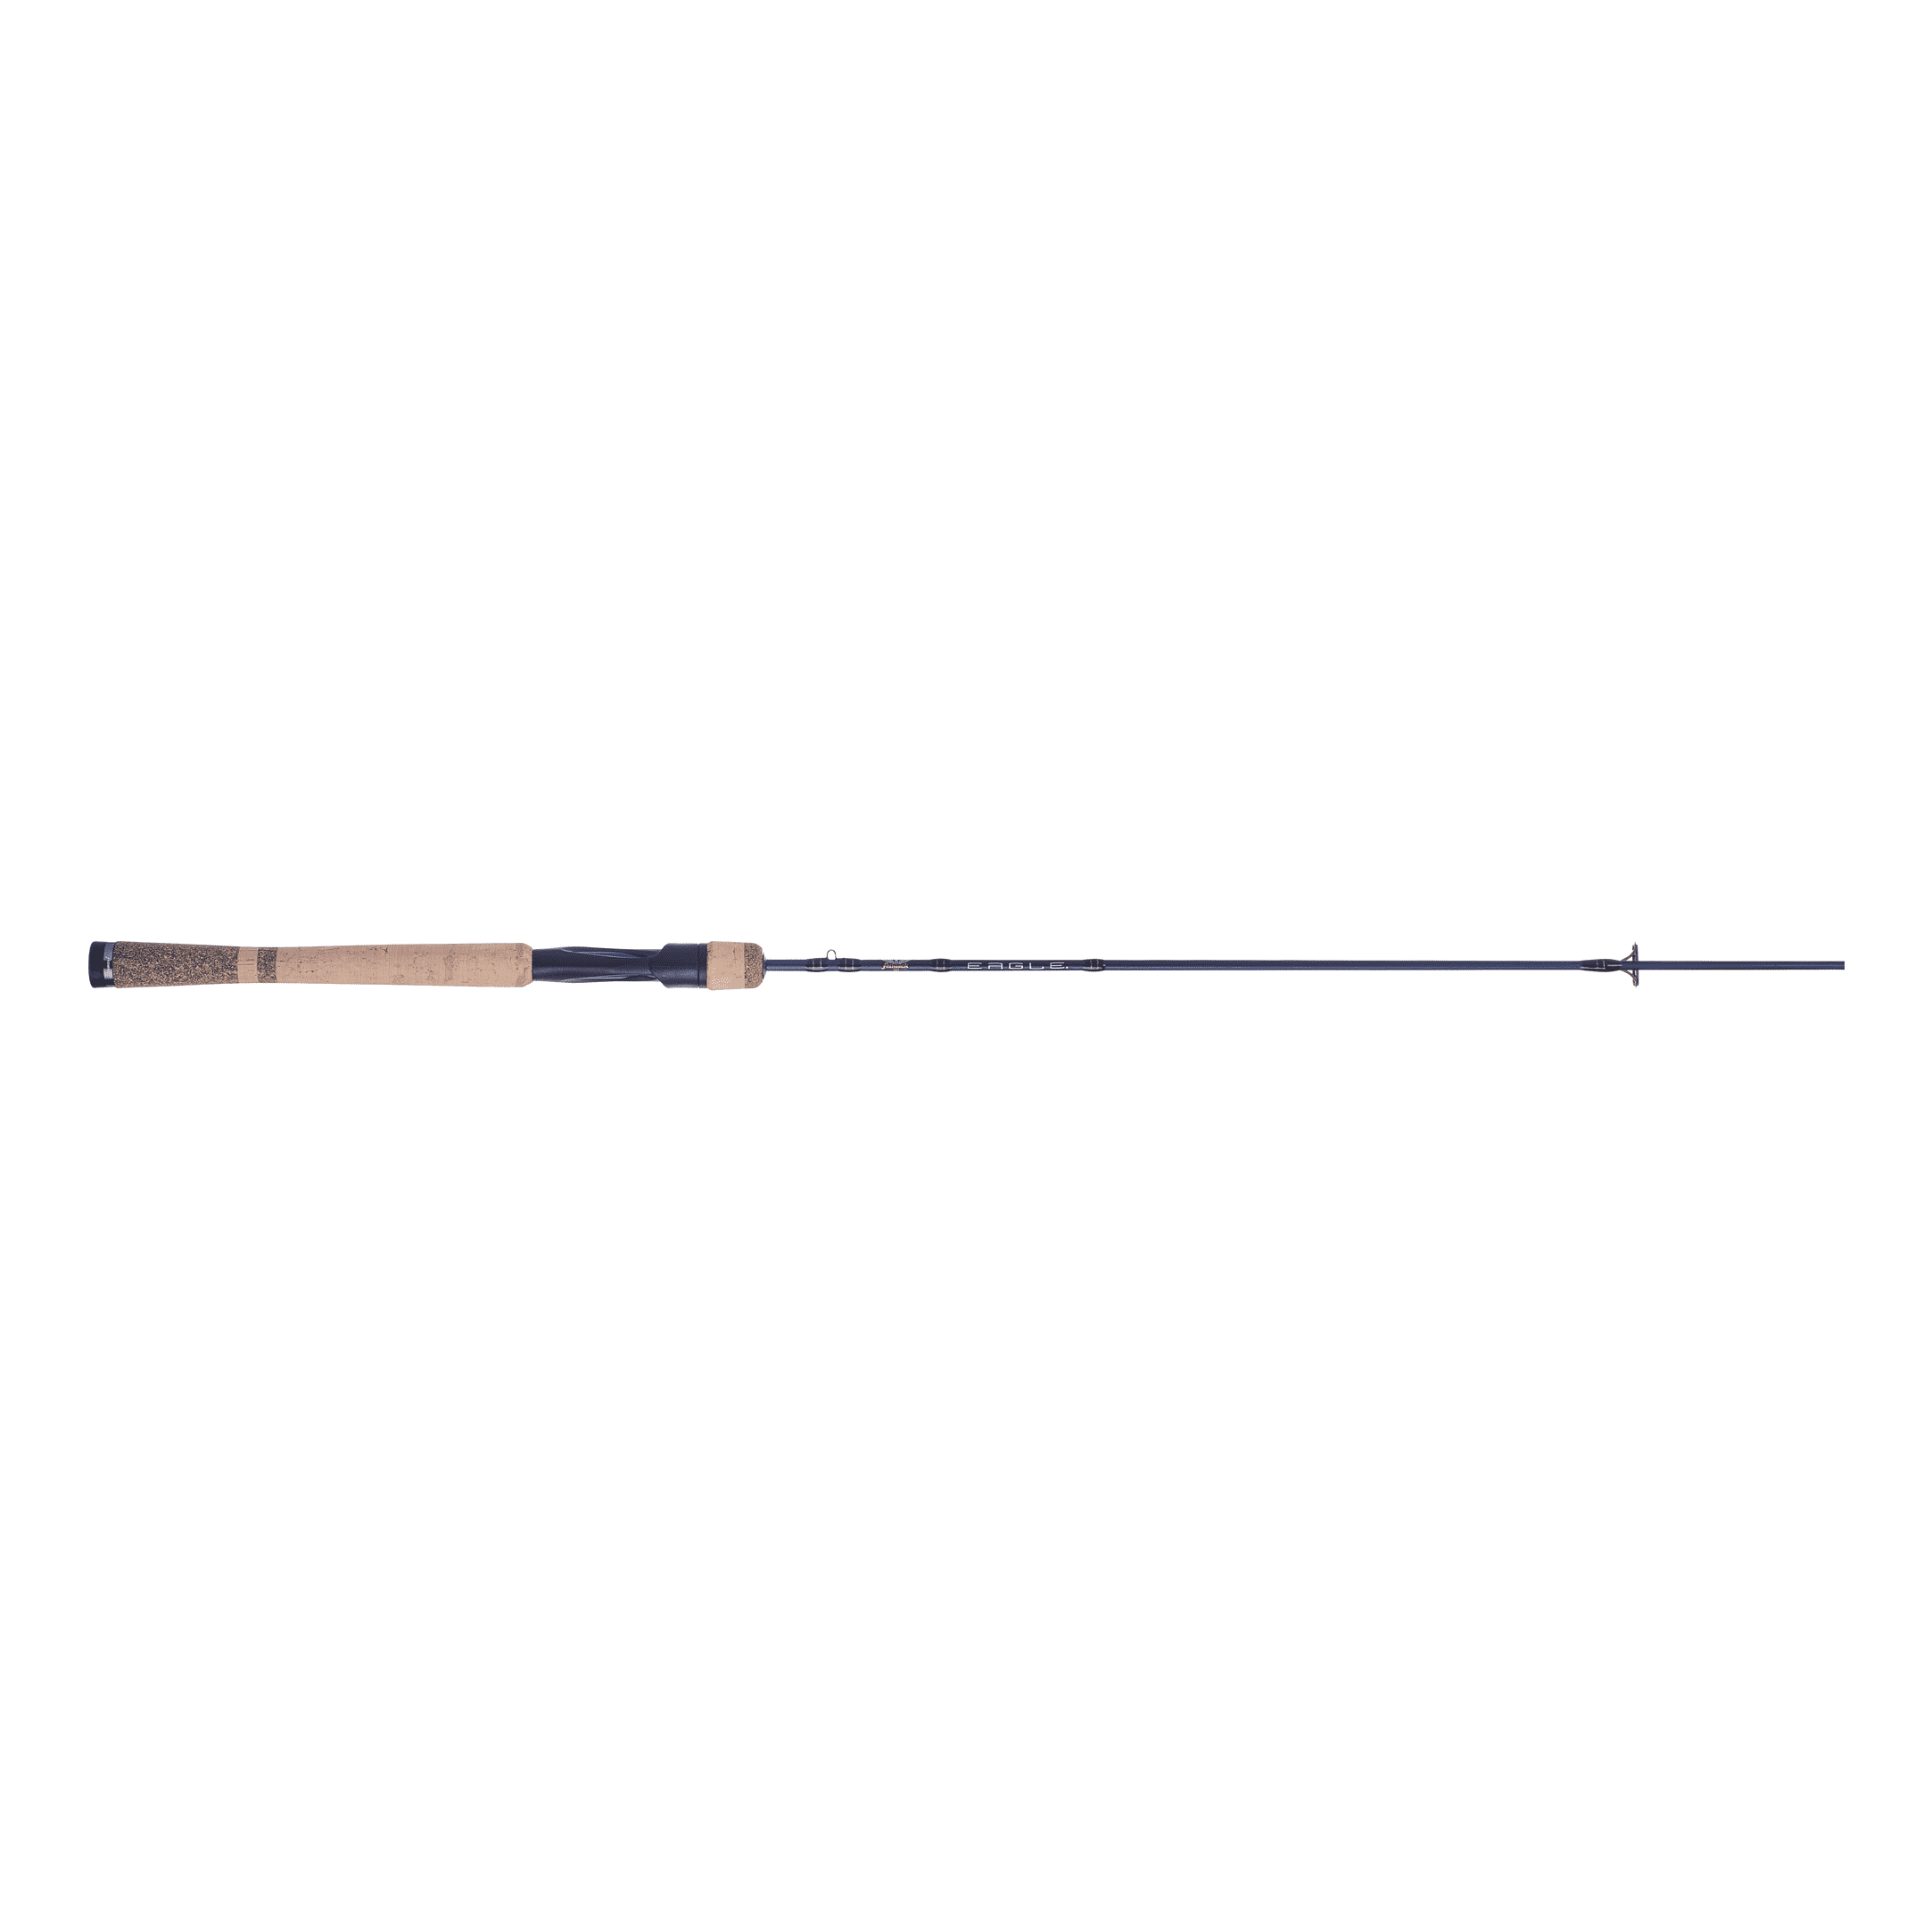 CABELAS FISH EAGLE II GRAPHITE spinning rod 5'6 UL with hard case